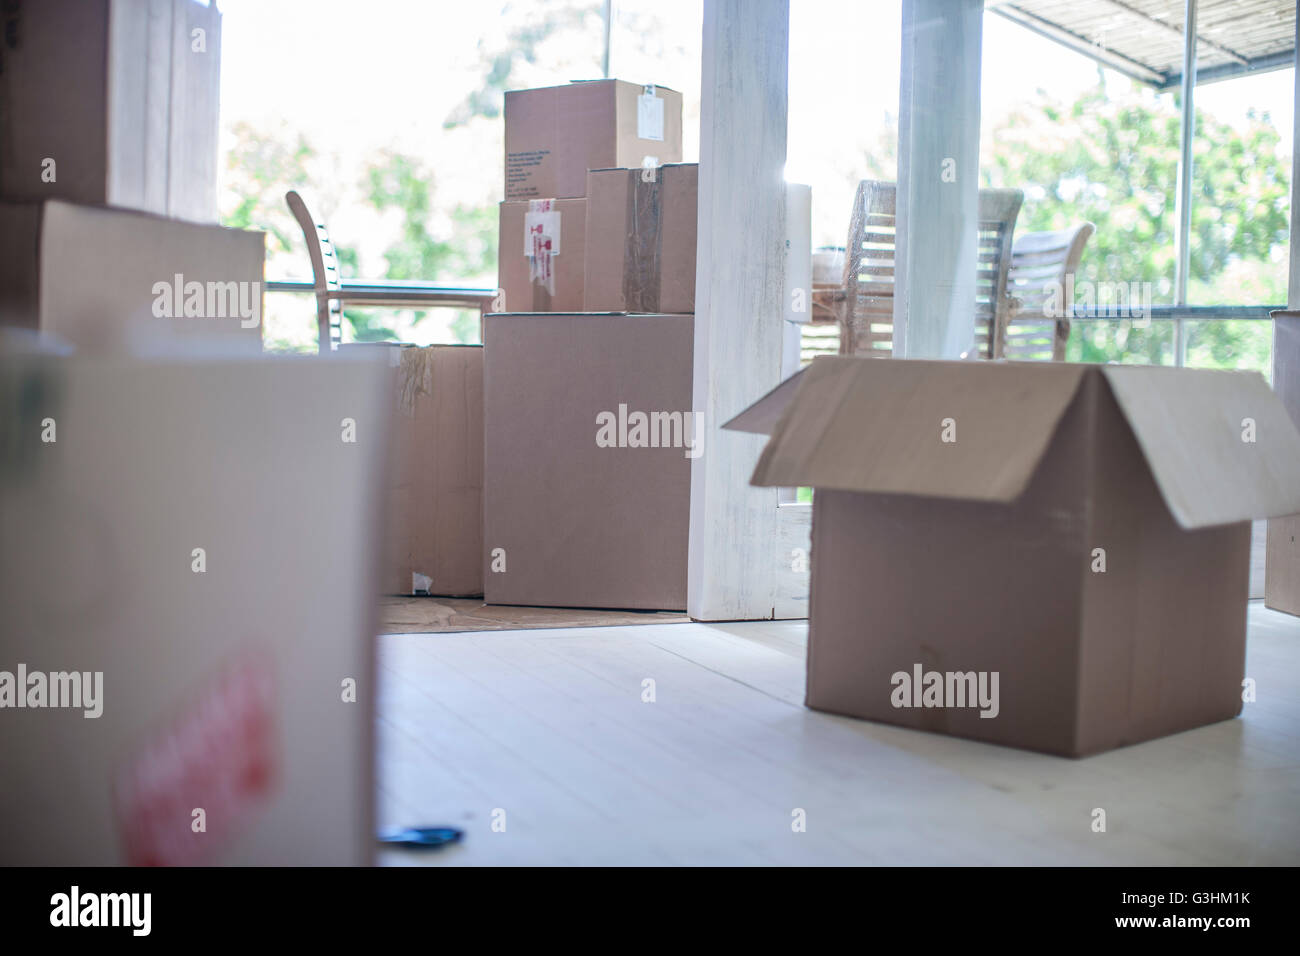 Moving house: Room filled with cardboard boxes Stock Photo